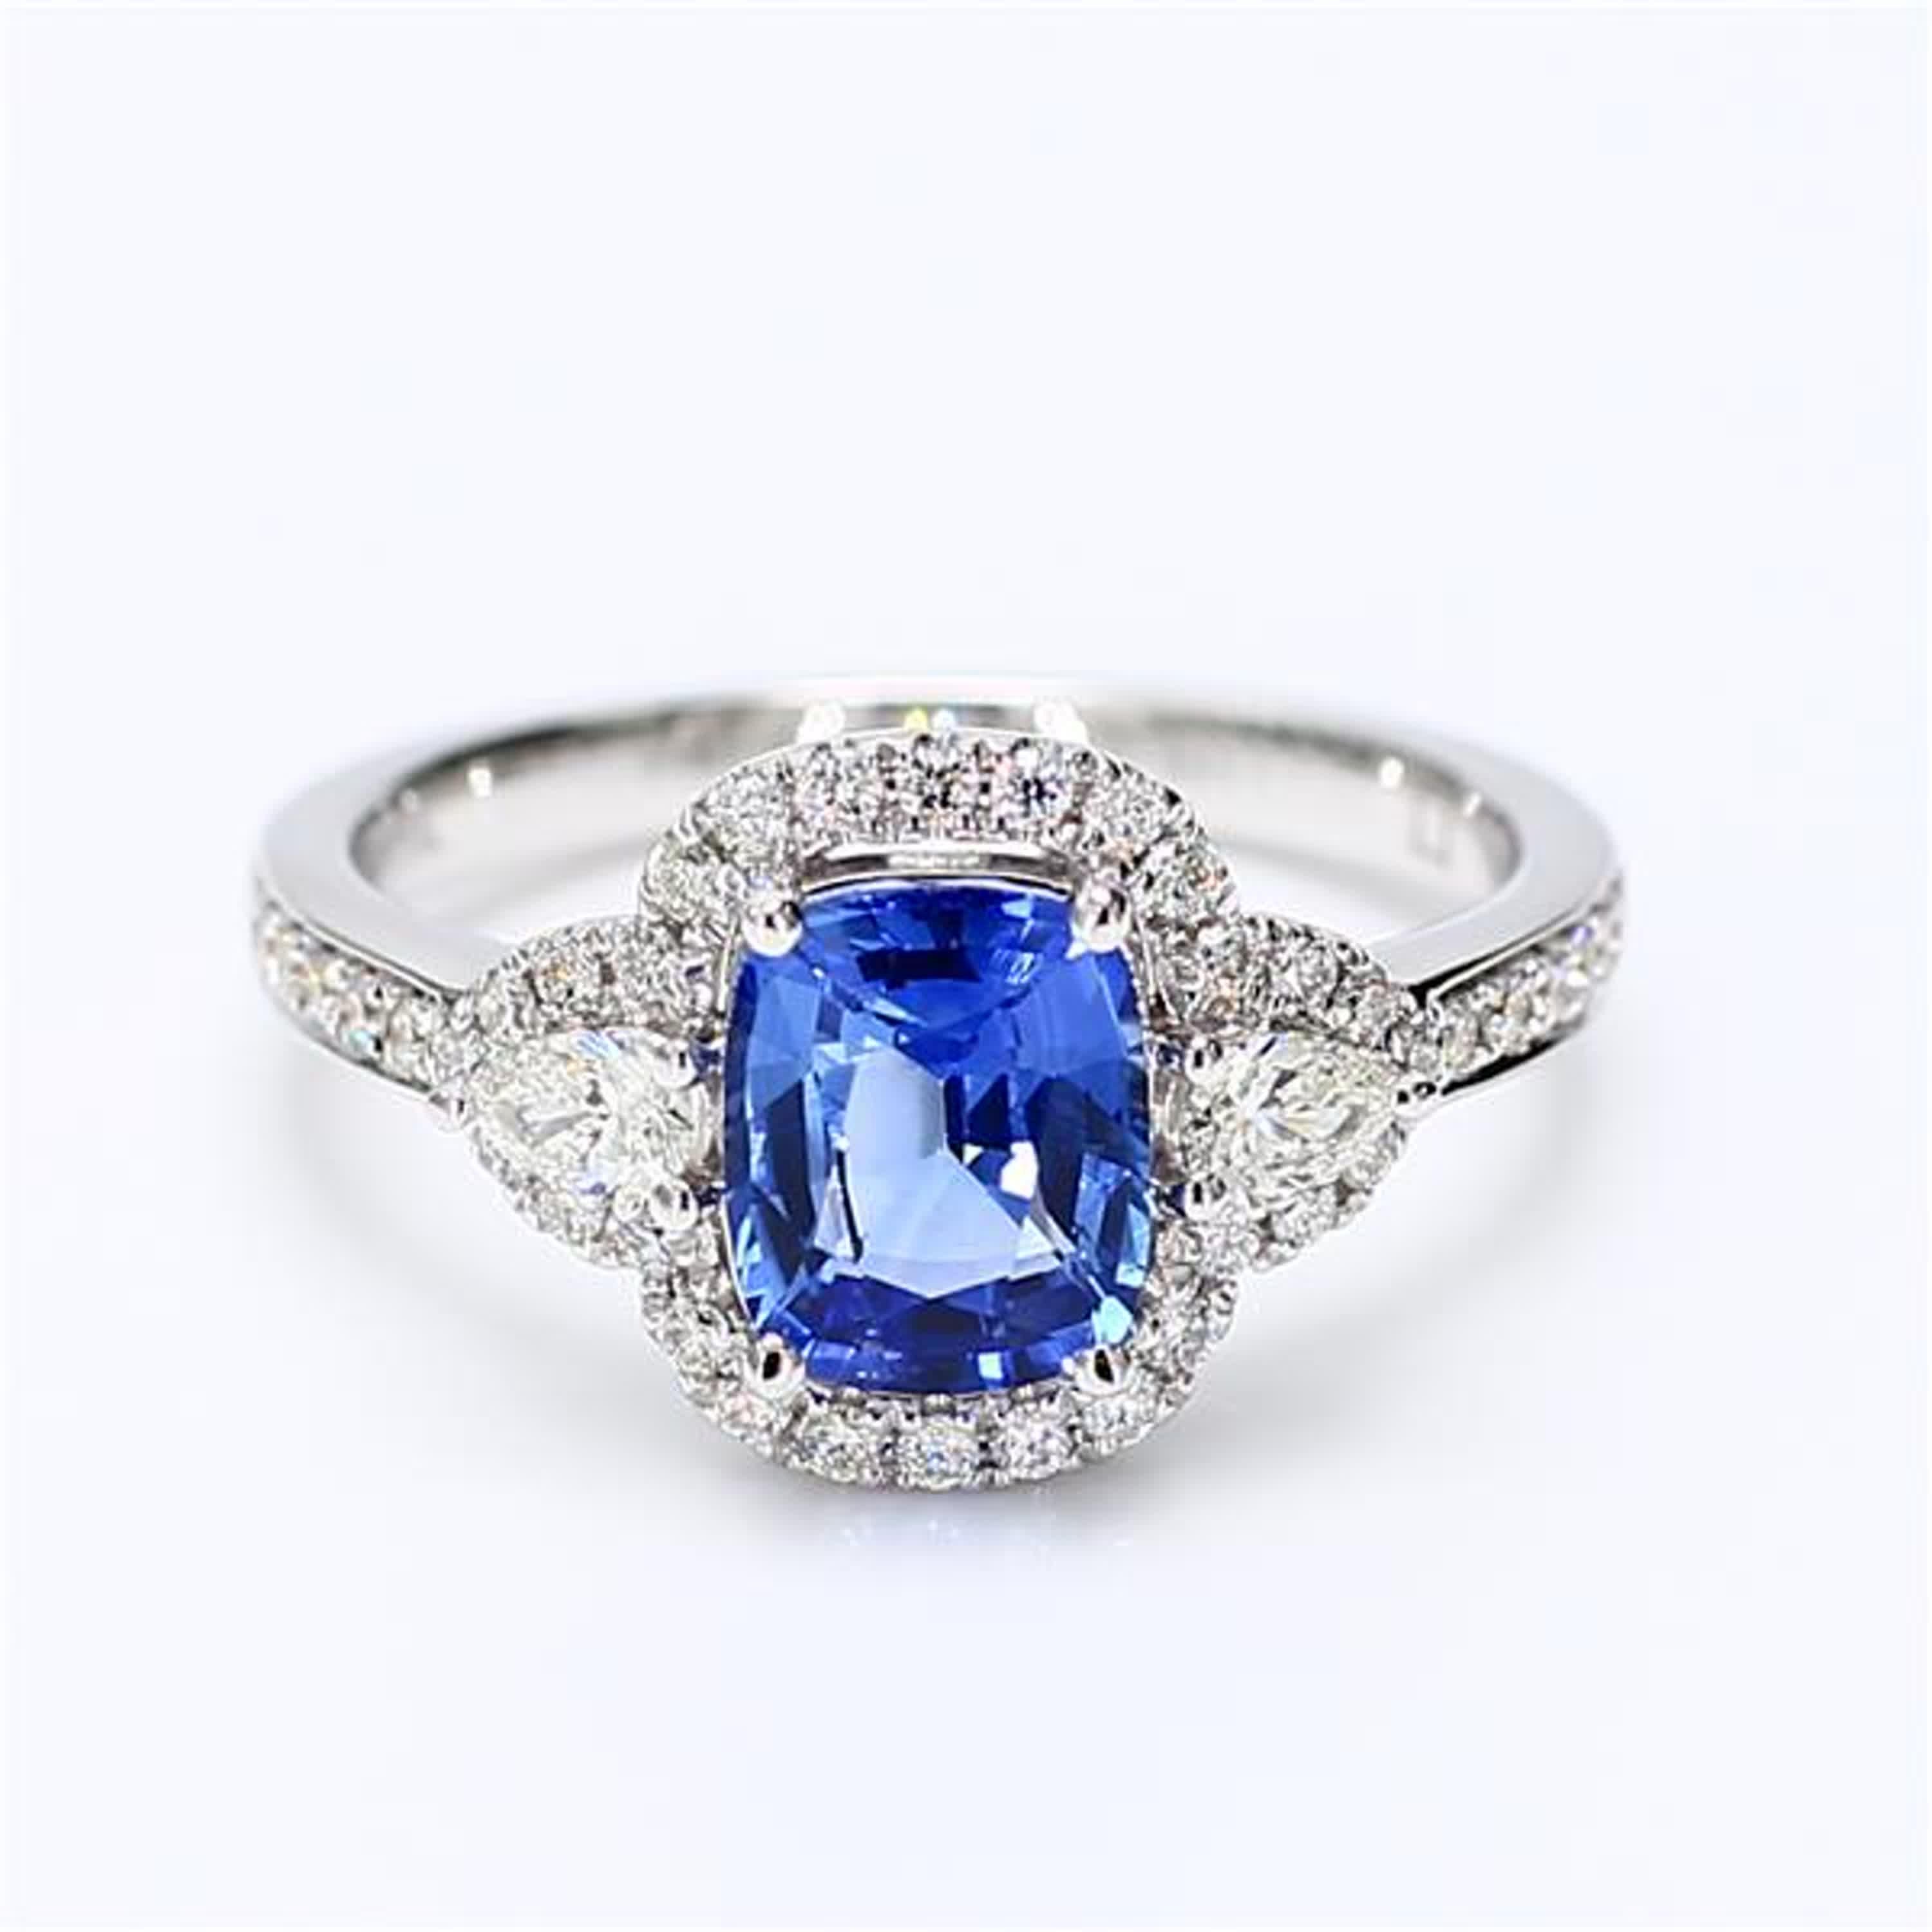 RareGemWorld's classic sapphire ring. Mounted in a beautiful 18K White Gold setting with a natural cushion cut blue sapphire. The sapphire is surrounded by natural round white diamond melee as well as natural pear cut white diamonds. This ring is